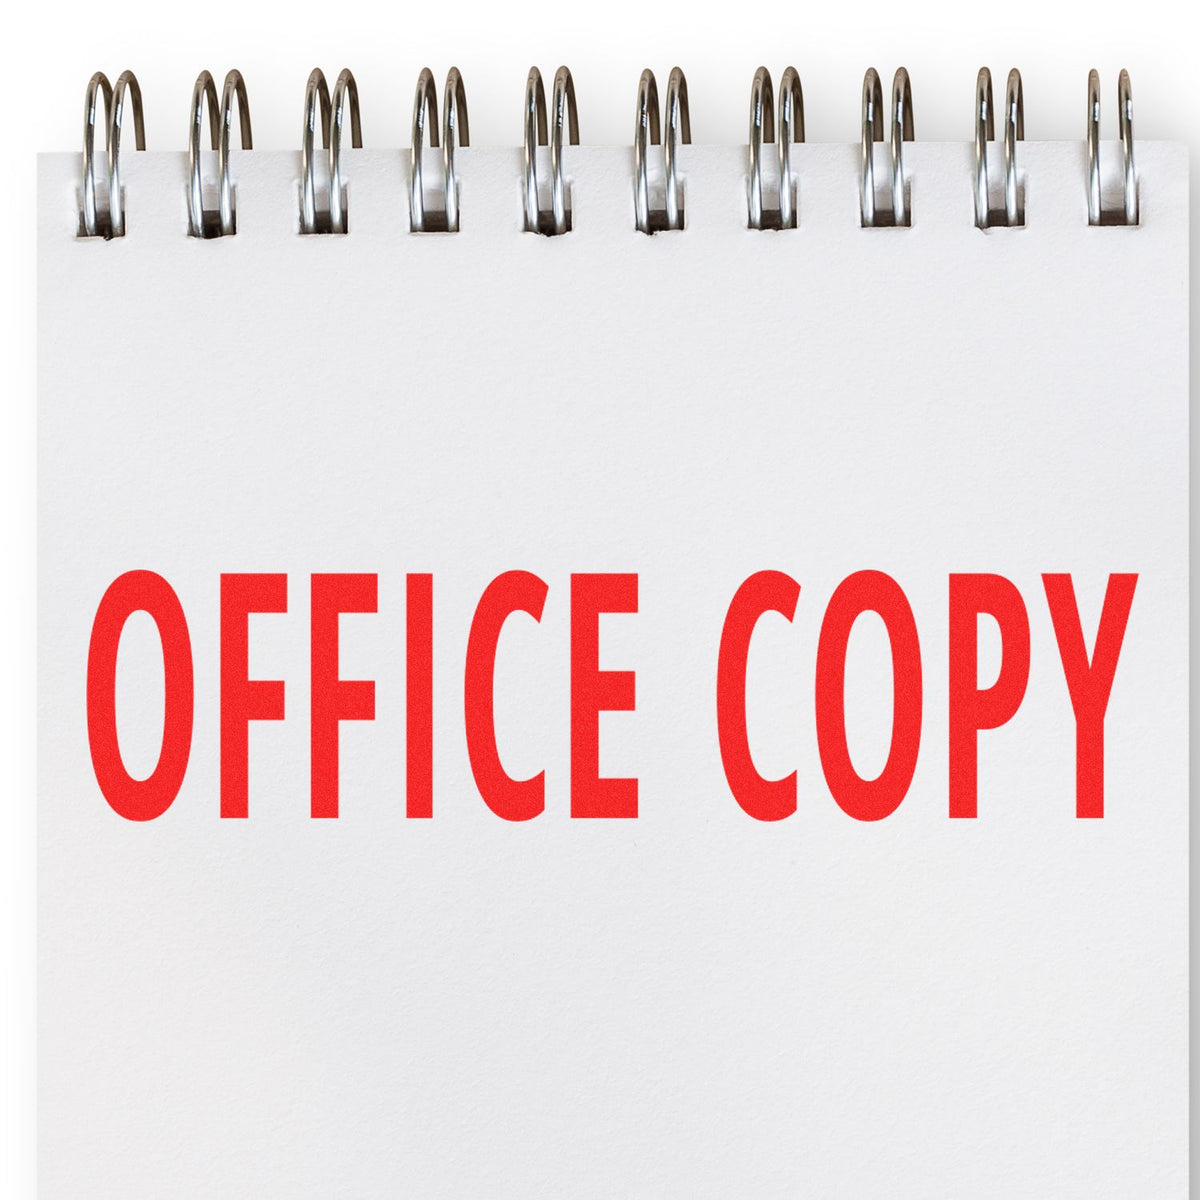 Large Self-Inking Office Copy Stamp In Use Photo